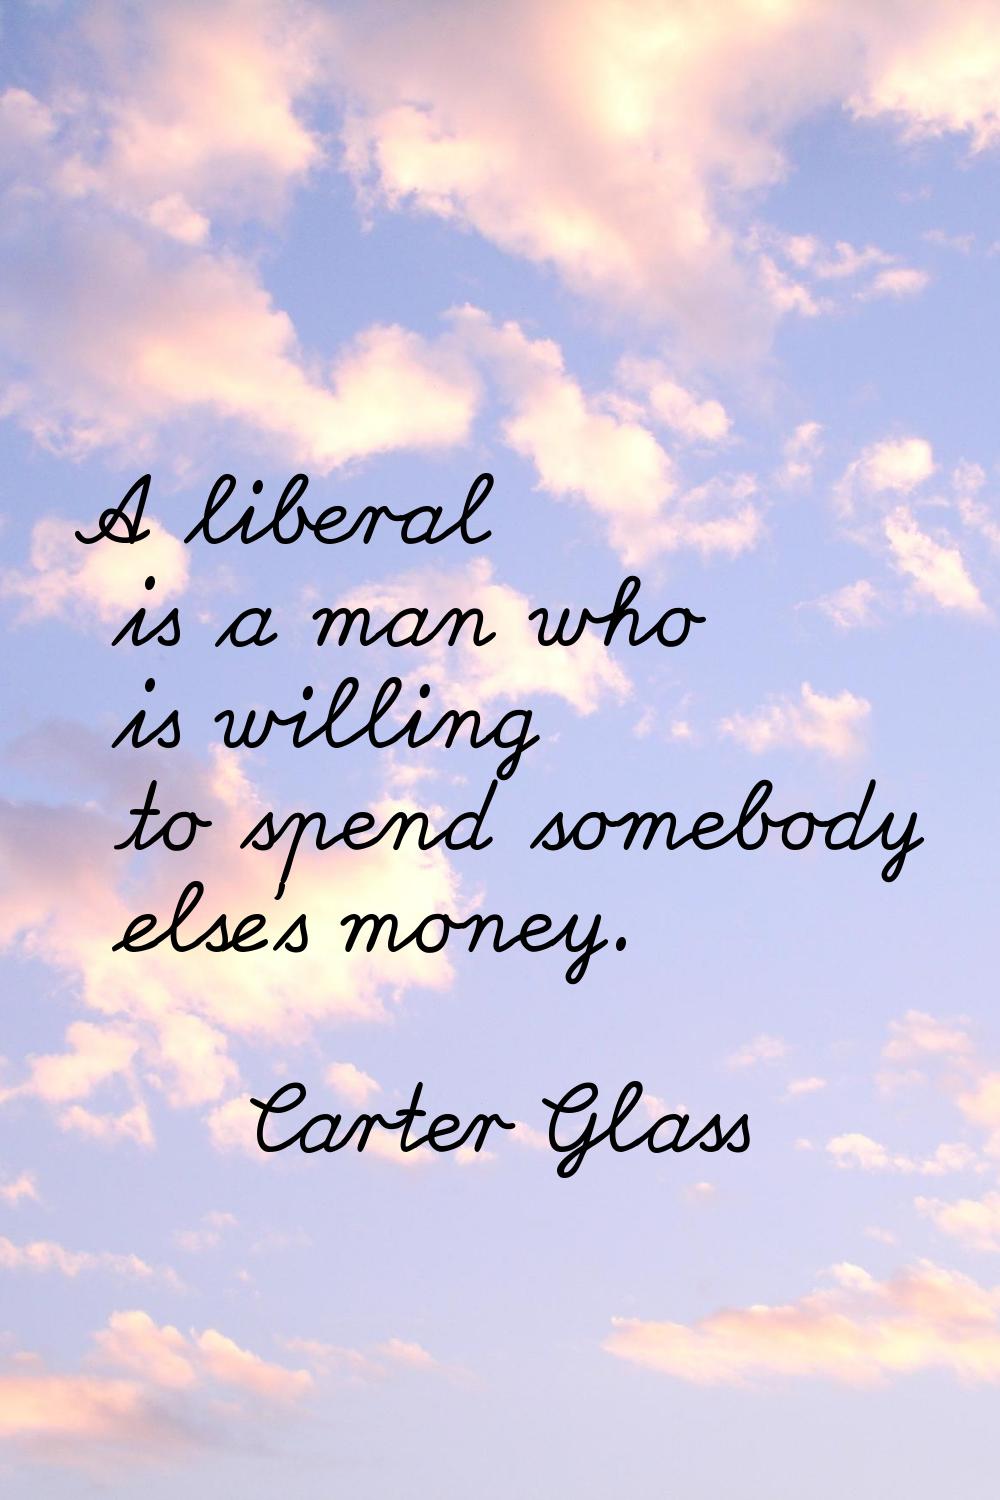 A liberal is a man who is willing to spend somebody else's money.